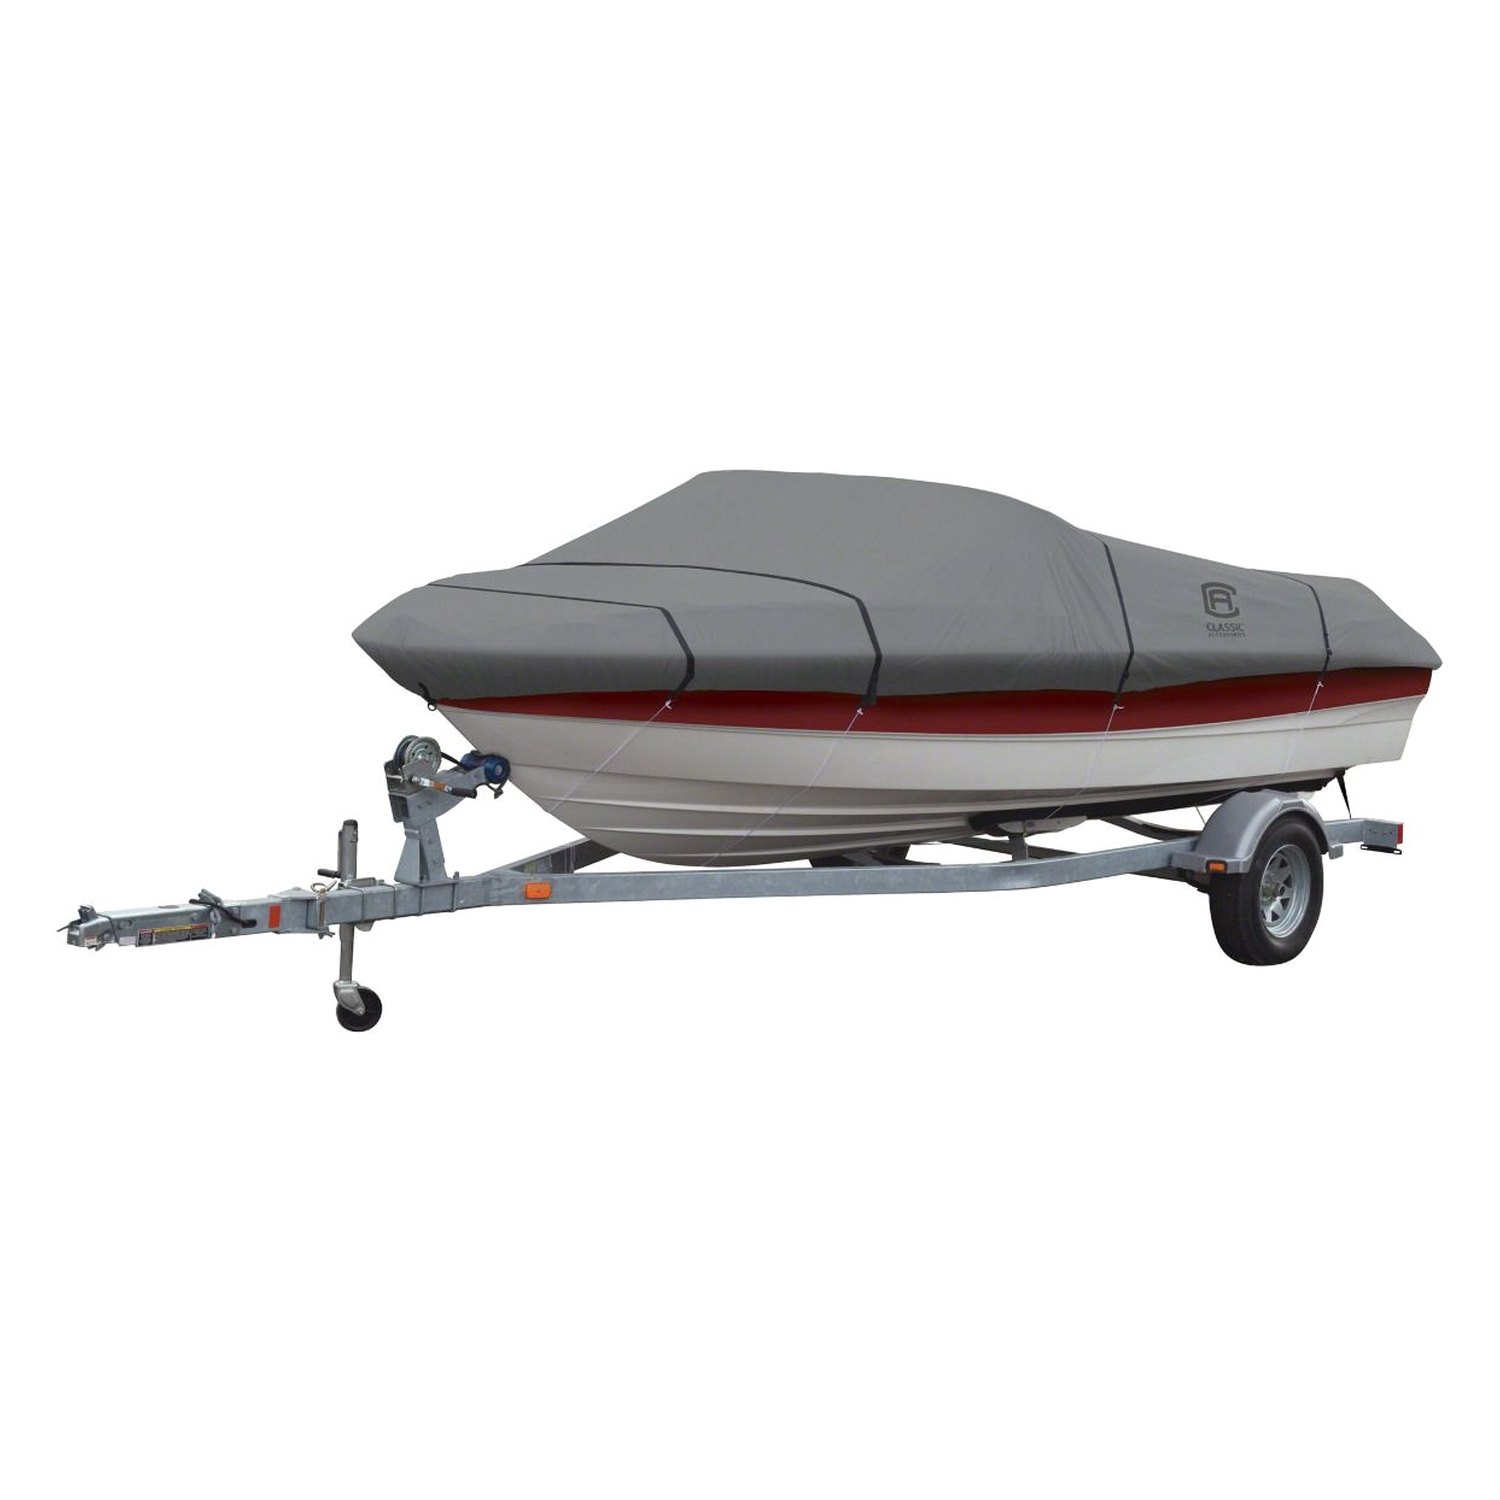 Classic Accessories® 2014109100100 Lunex Rs1™ Gray Rip/Stop Boat Cover for 14'16' L x 90